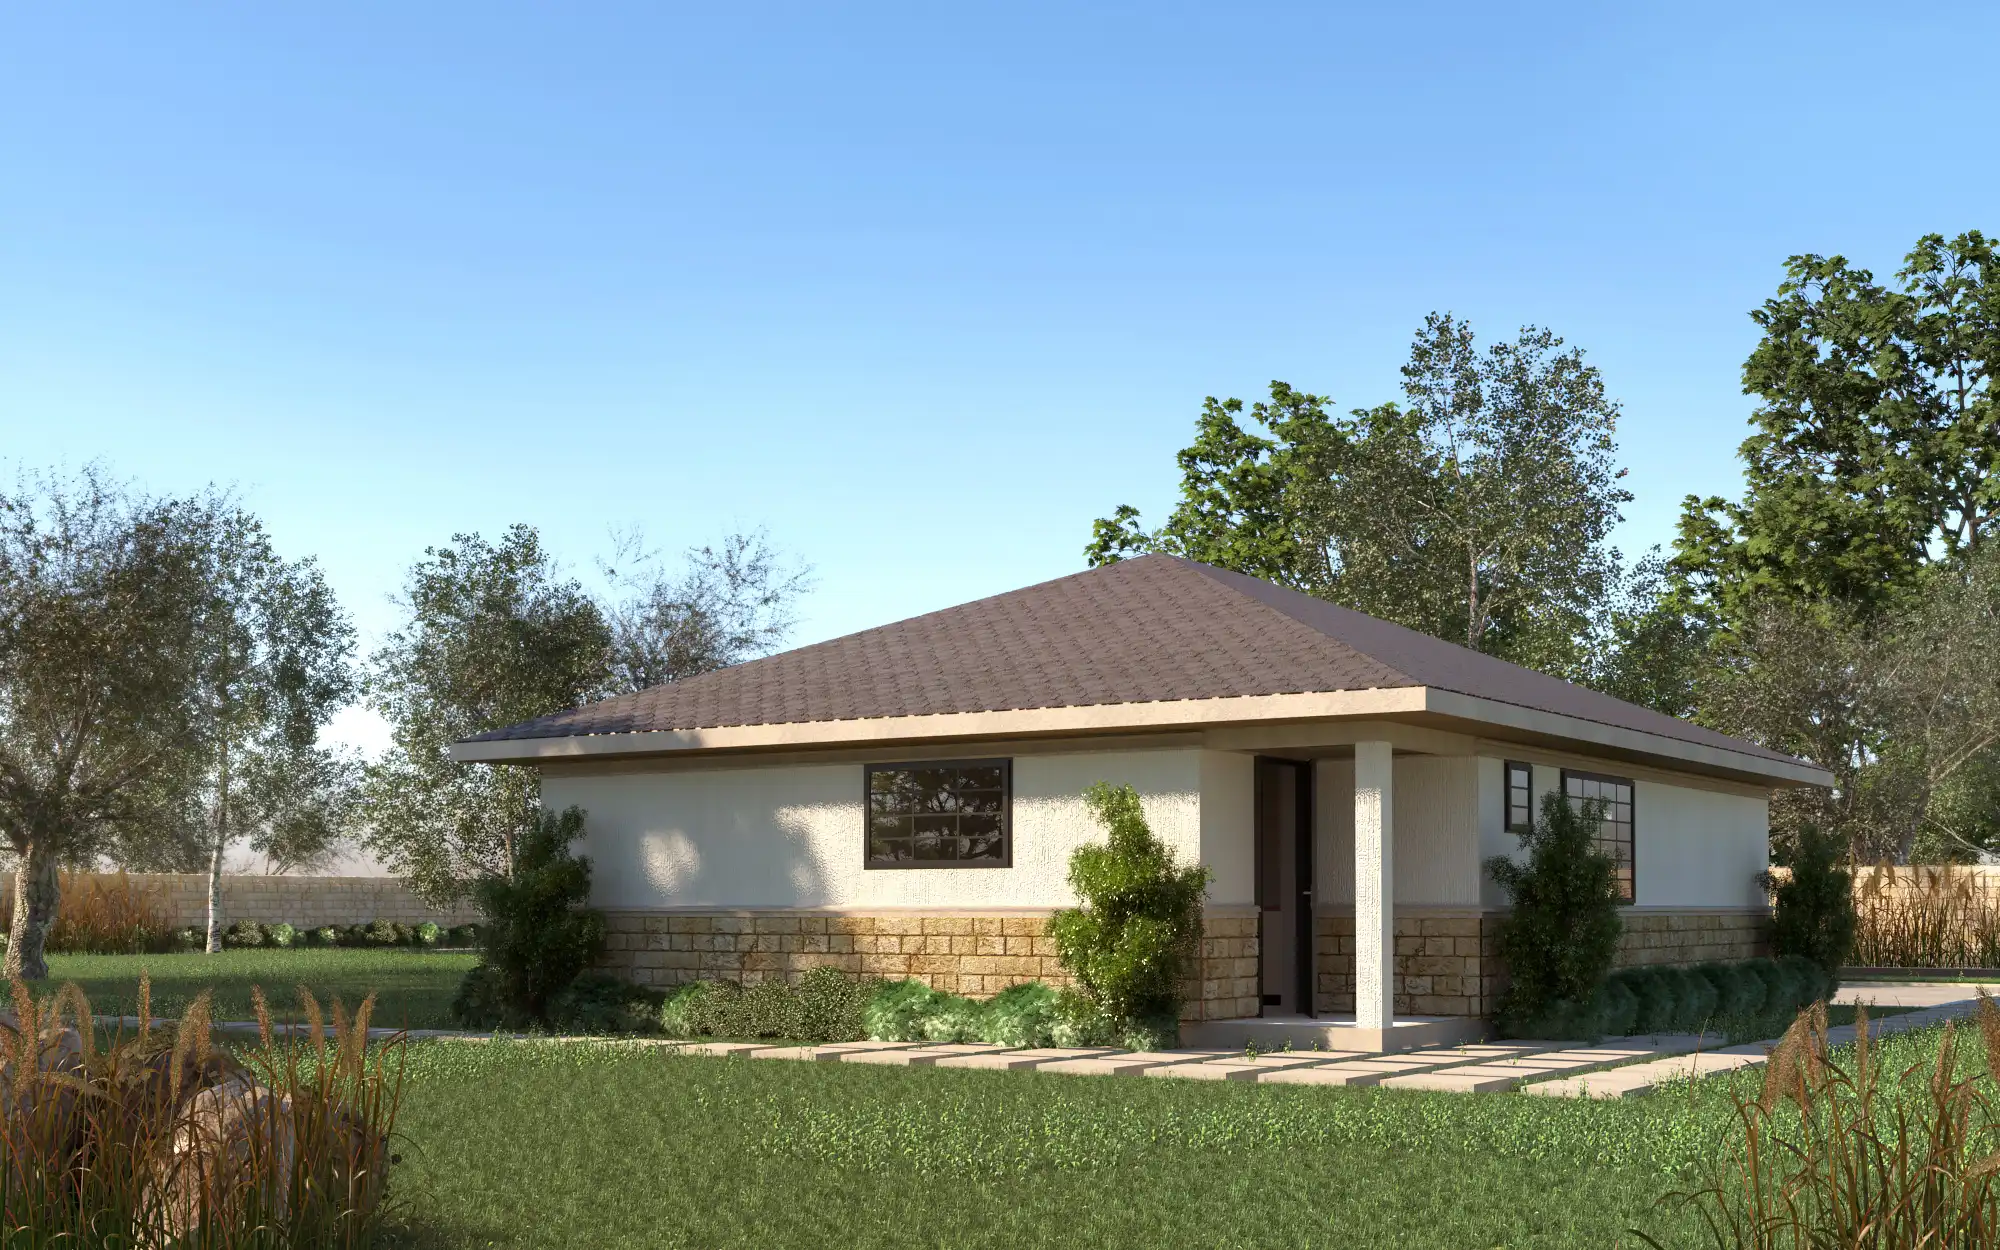 2 Bedroom Bungalow -ID 2112 - 2 BED BNGL TP1 OP2 REAR.jpg from Inuua Tujenge house plans with 2 bedrooms and 1 bathrooms. ( bungalow )